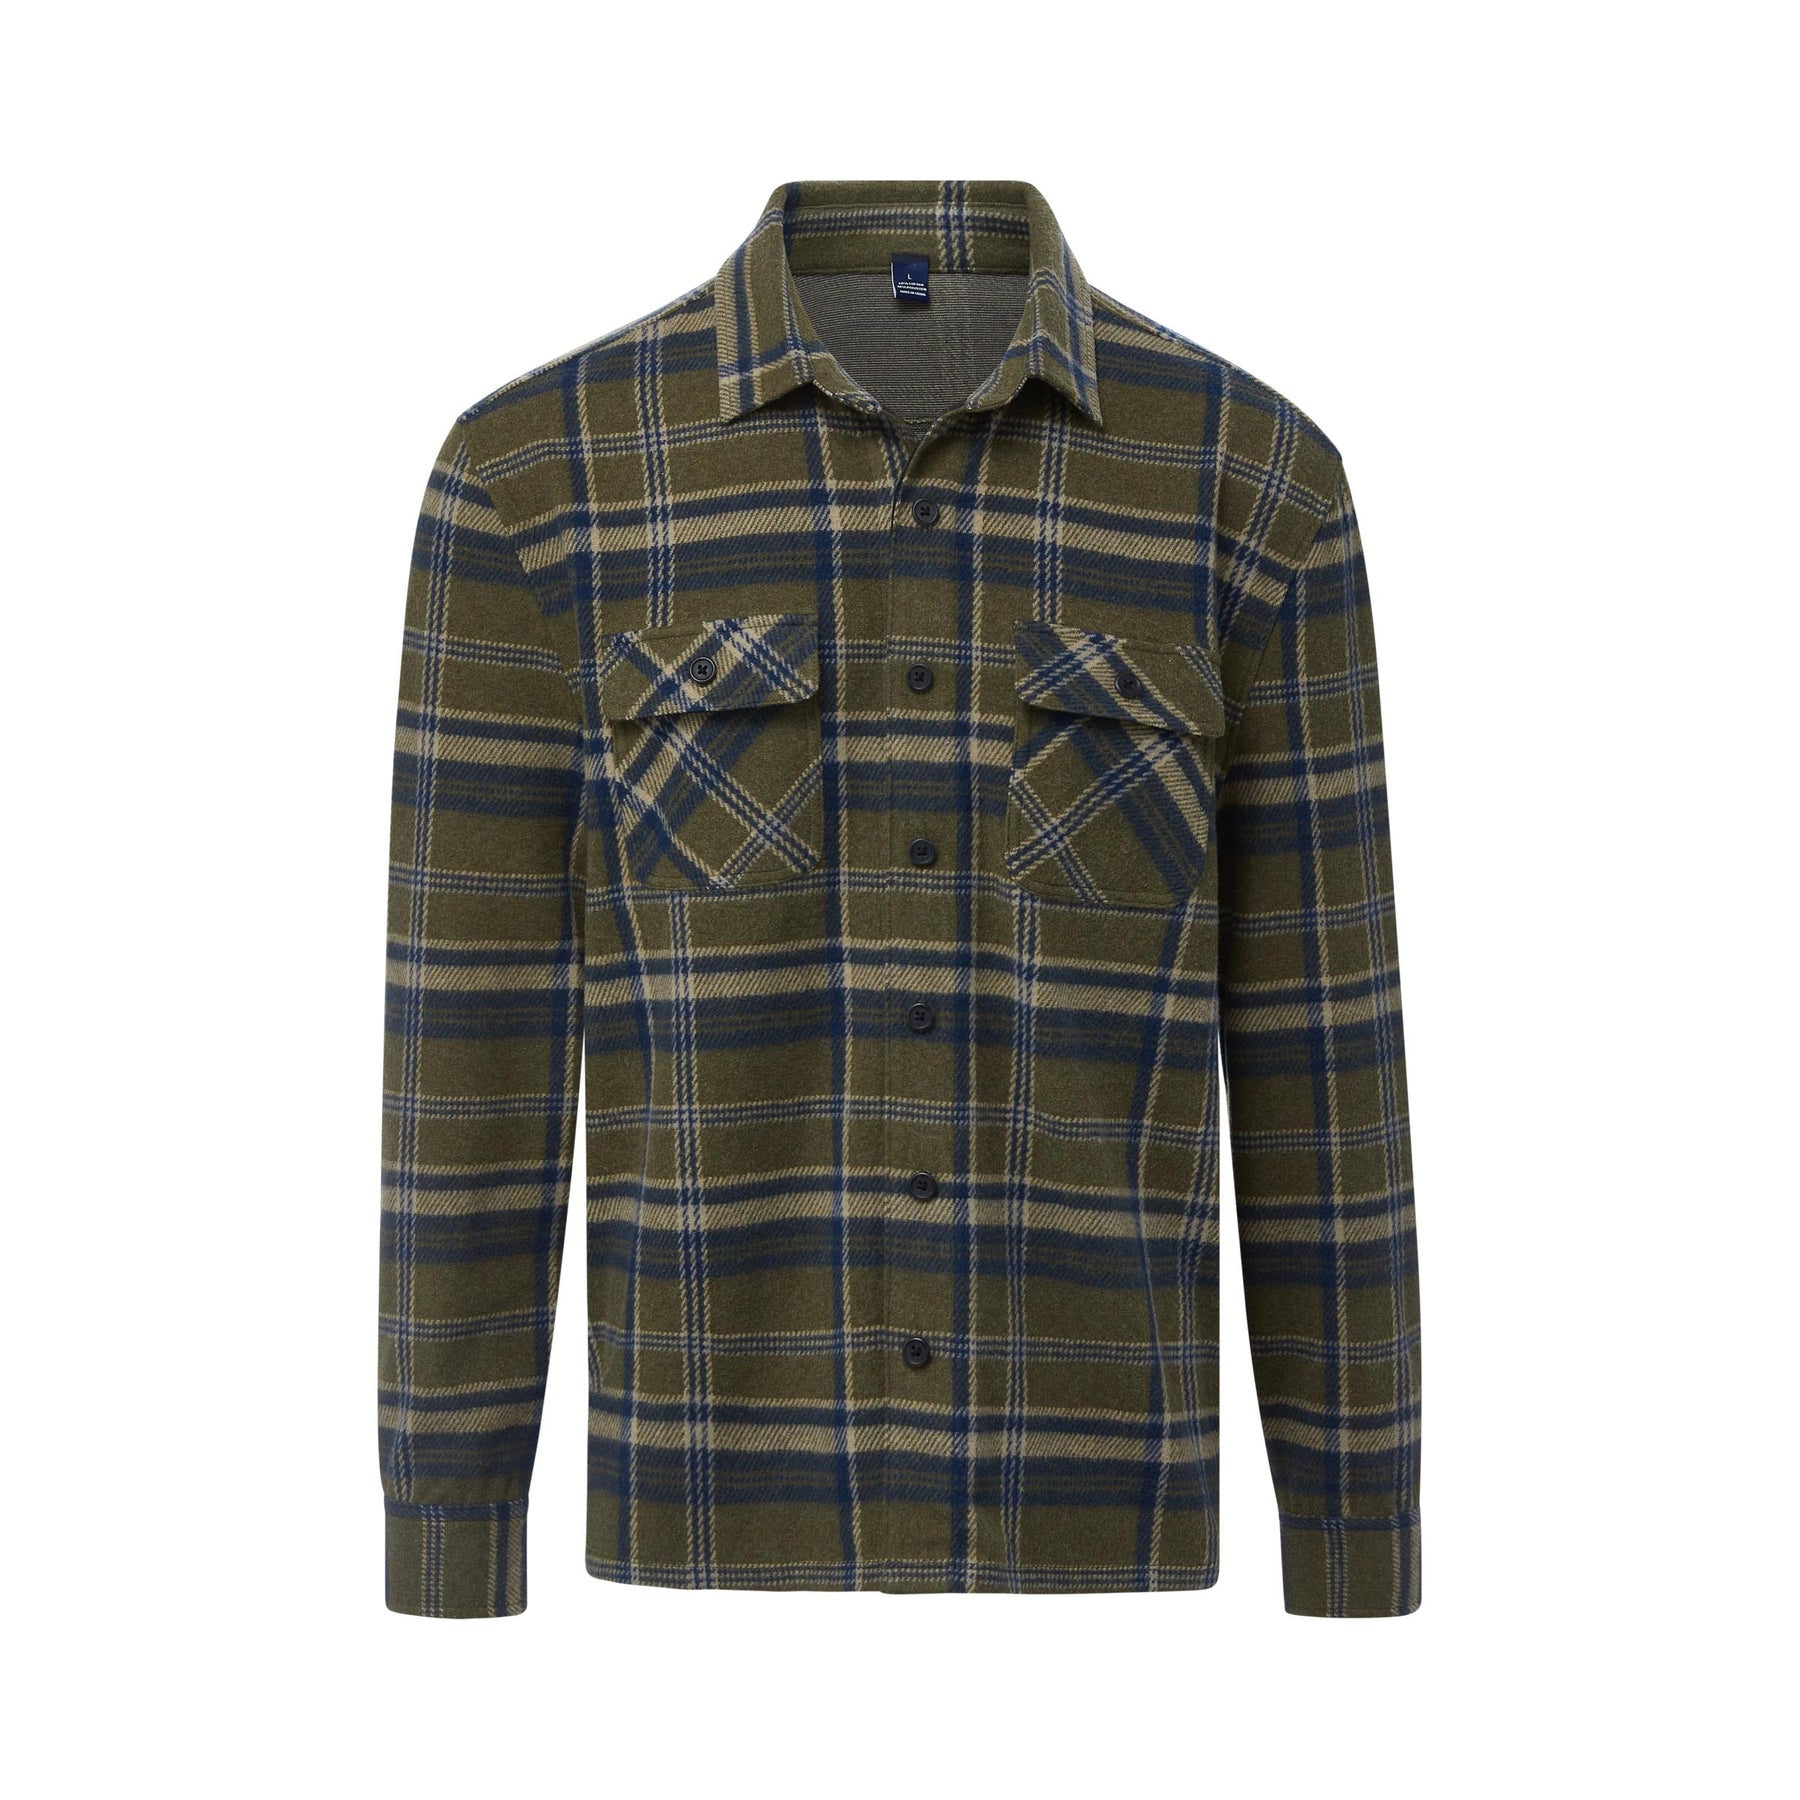 Long Sleeve Olive Plaid Flannel Shirt Combo Layering Piece with Magnetic Closures